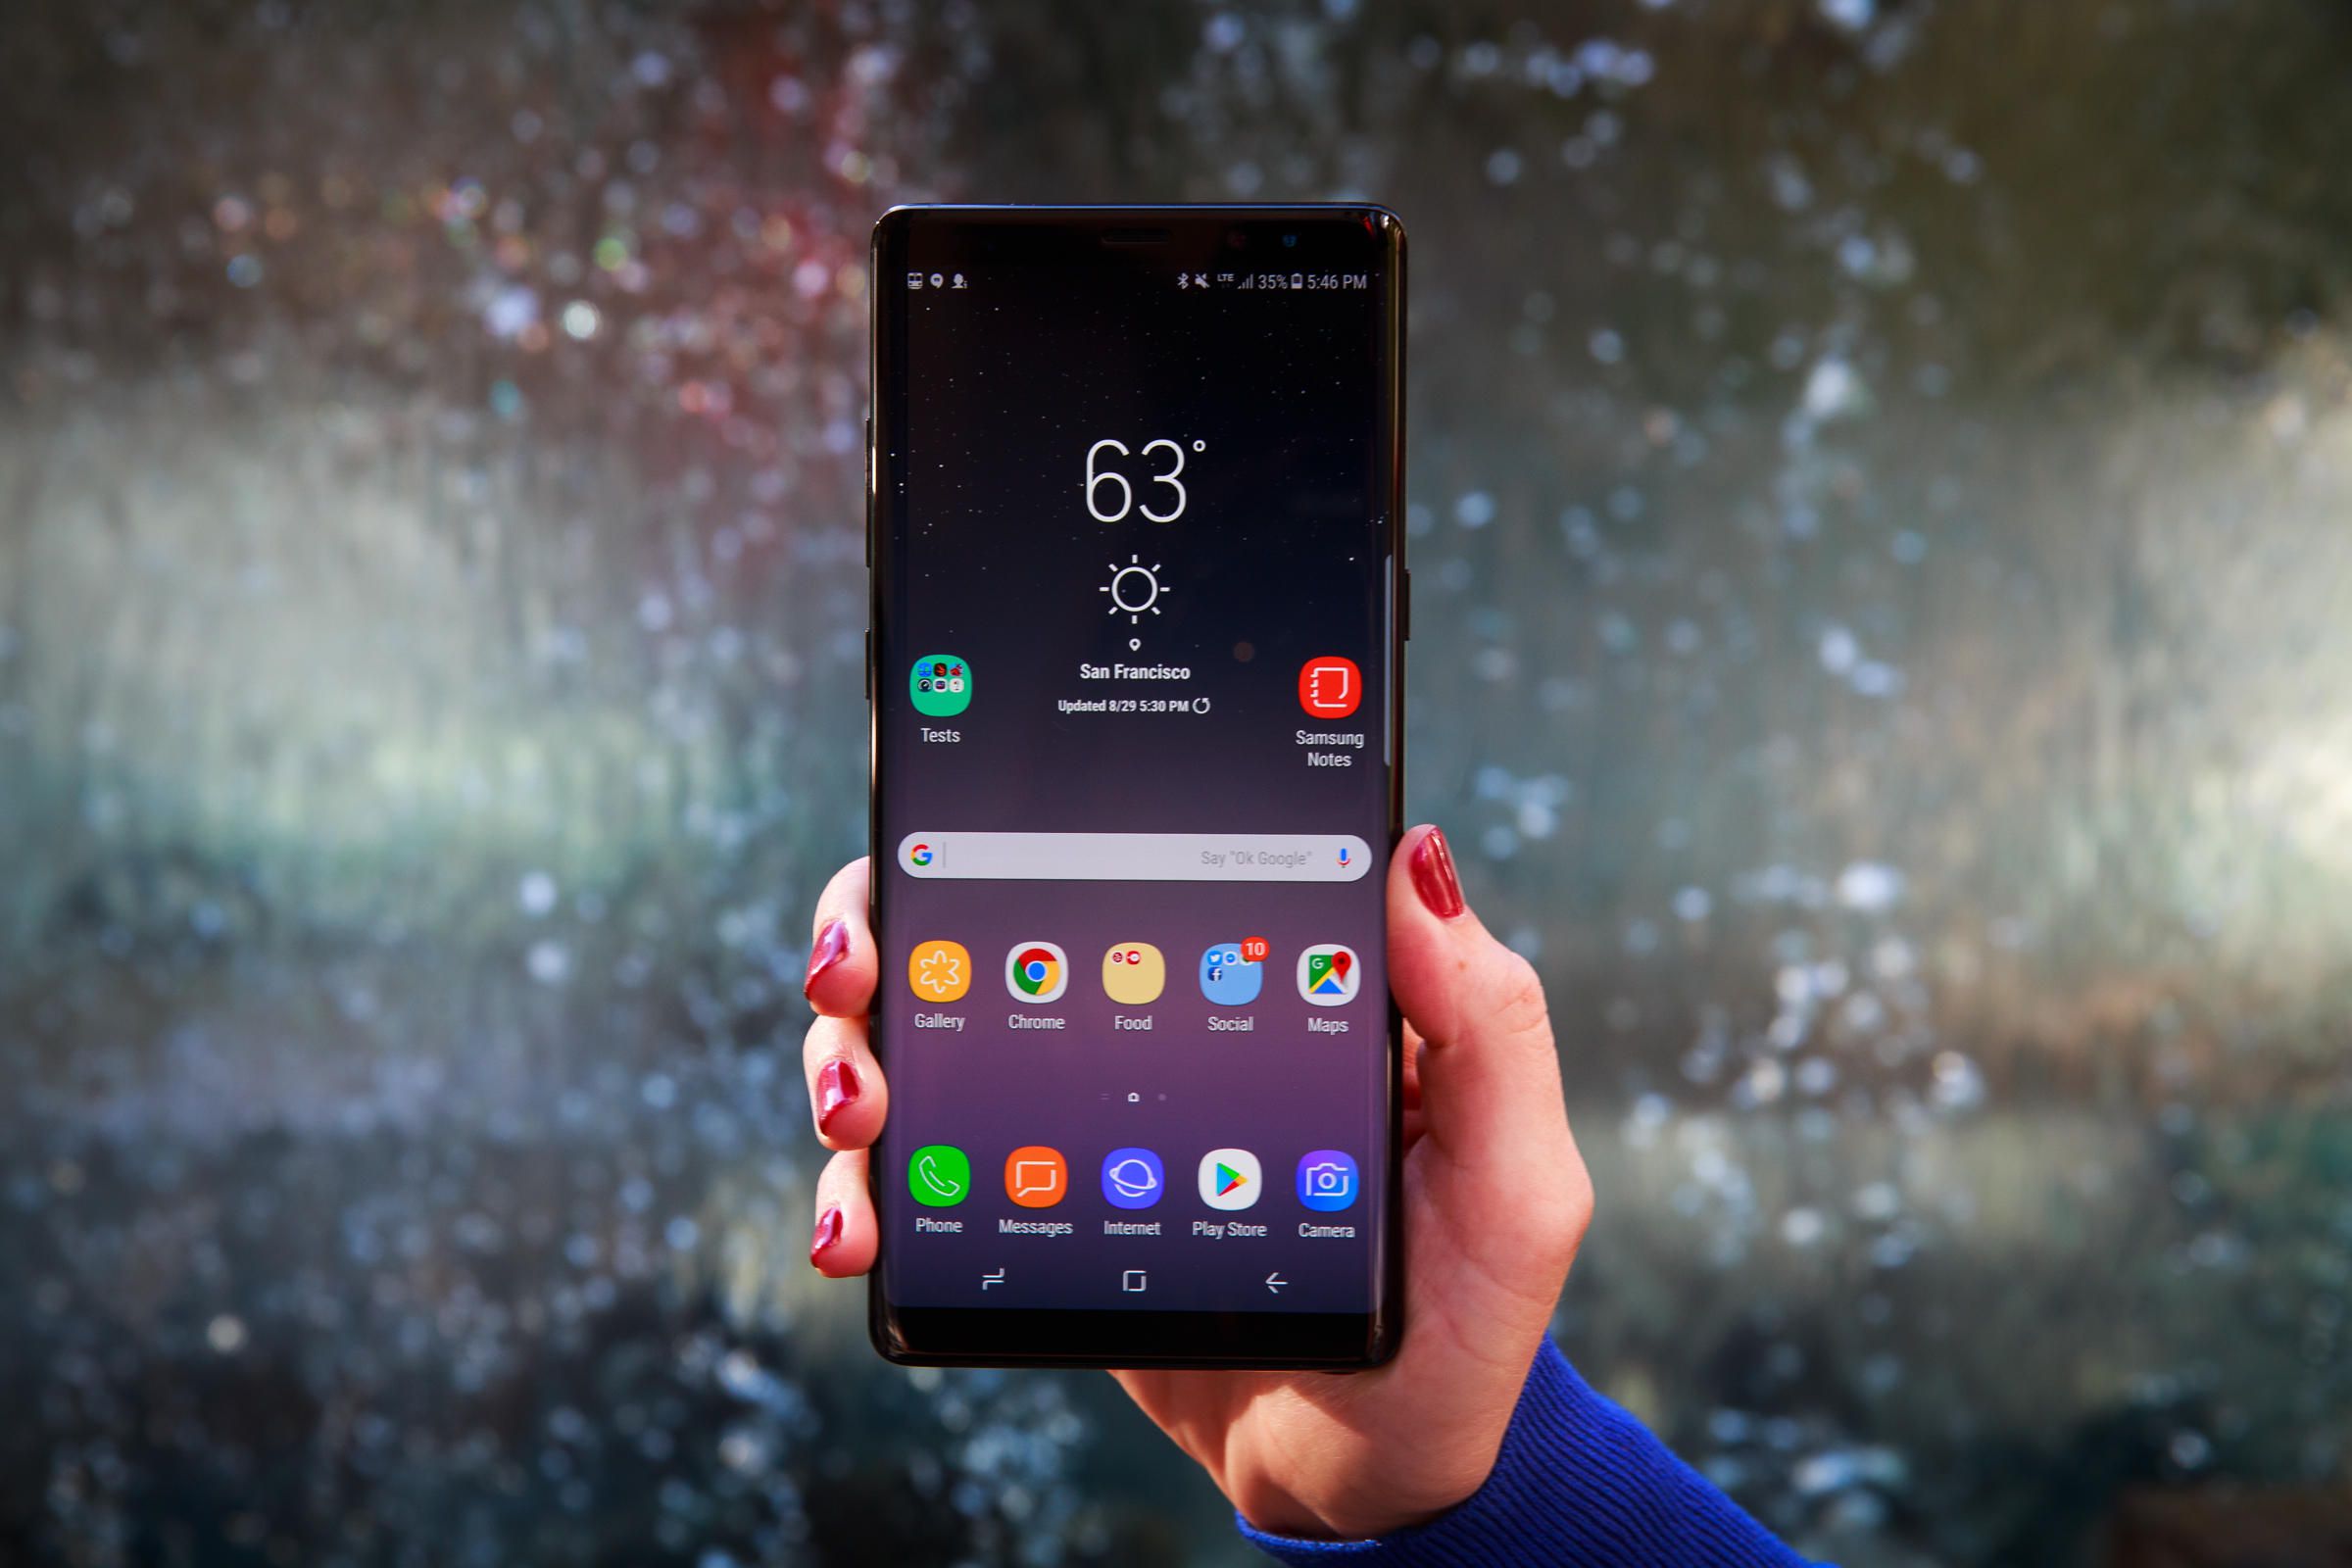 Samsung registered the name Galaxy Note 9